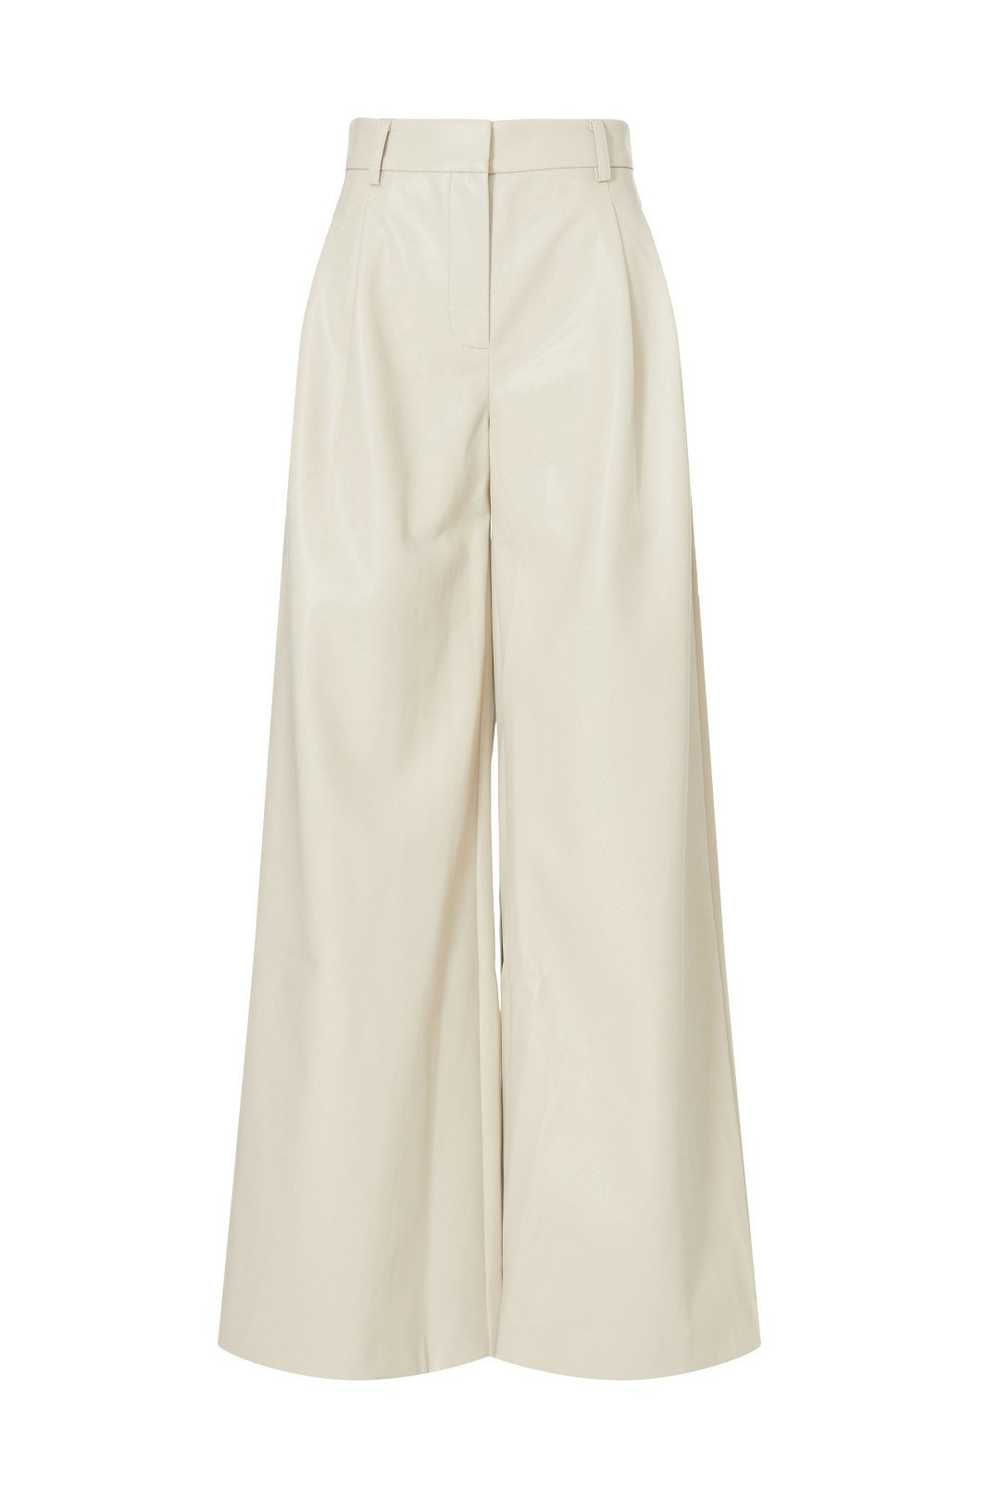 Saunders Collective Wide Leg Faux Leather Pants - image 5